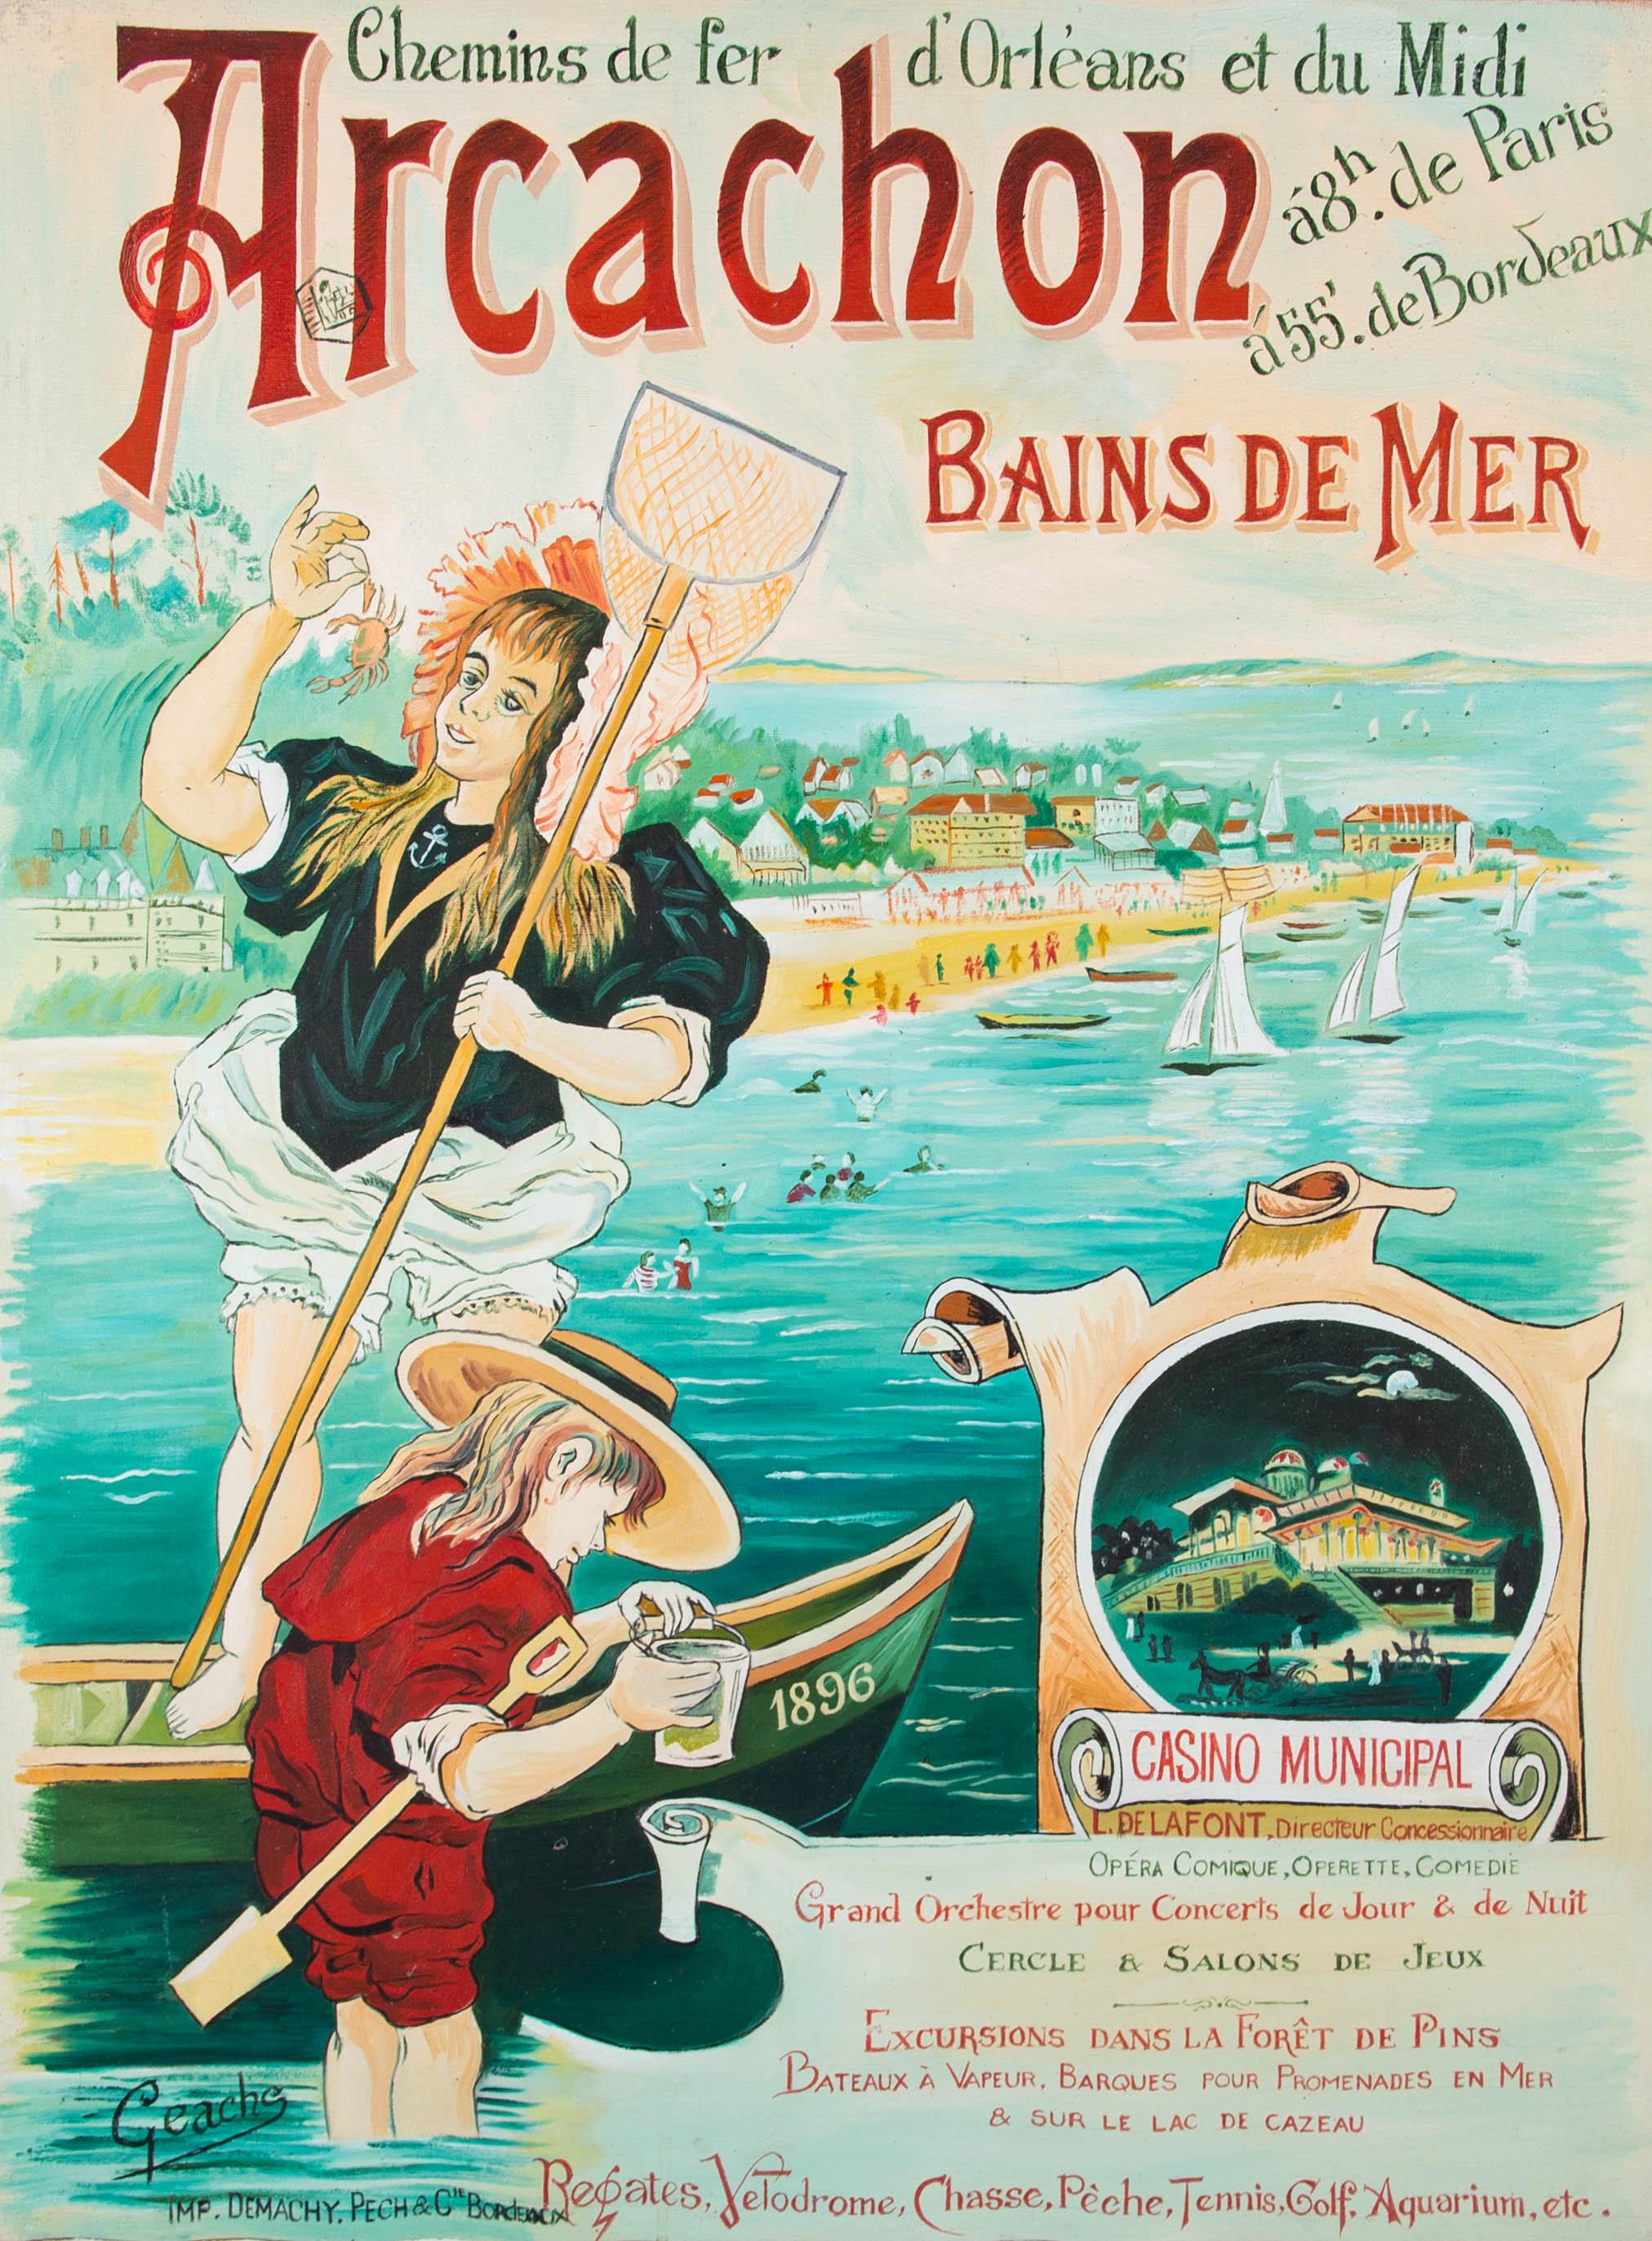 A delightful contemporary acrylic copy of the illustrated Arcachon poster from 1896. This retro travel poster features the city of Arcachon for the Chemins de fer d'Orleans et du Midi Railways. It portrays two young girls enjoying crabbing in the